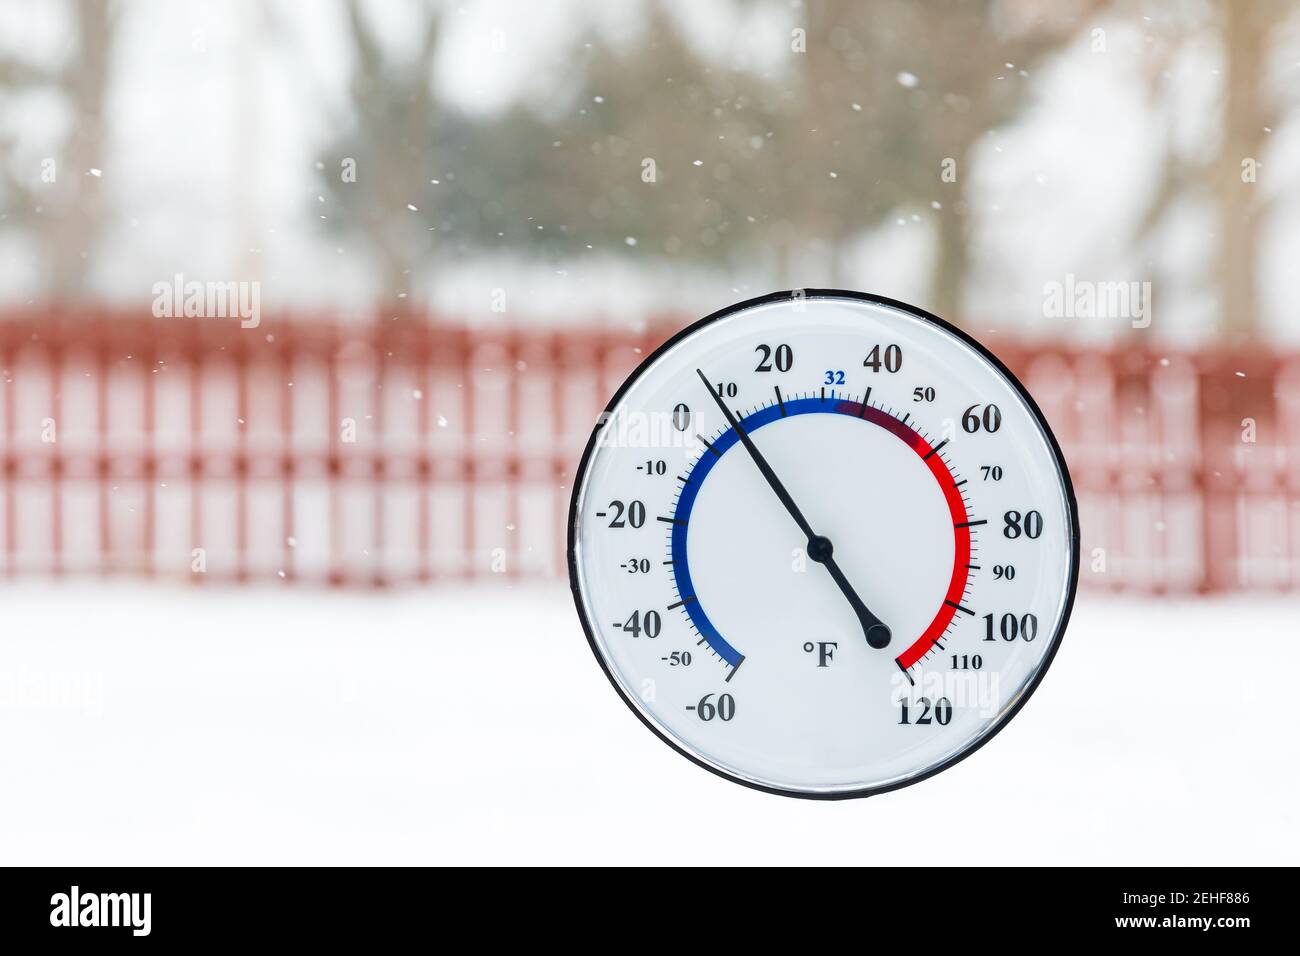 Thermometer showing cold temperature during winter snowstorm. Concept of freezing weather, cold temperature and winter safety Stock Photo